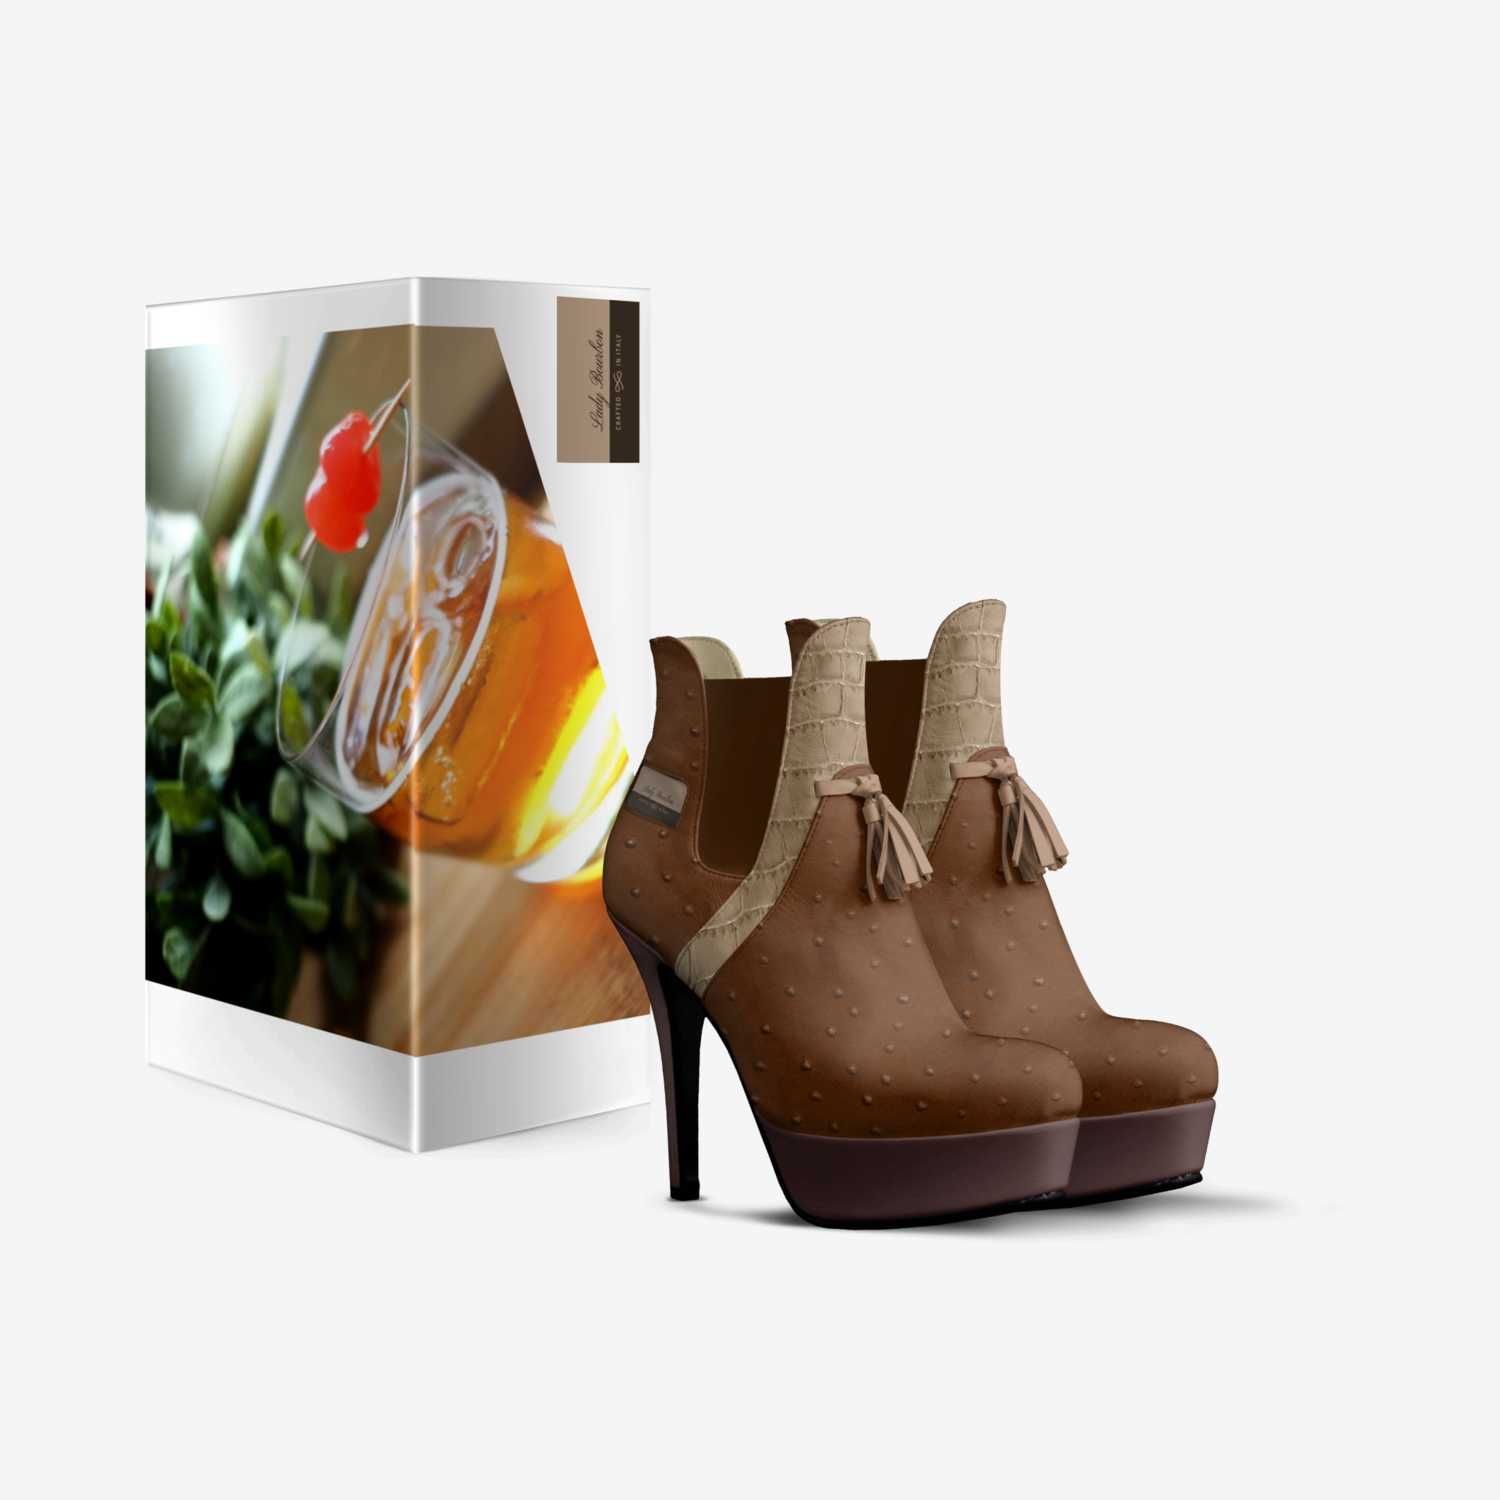 Lady Bourbon custom made in Italy shoes by J. Clay | Box view